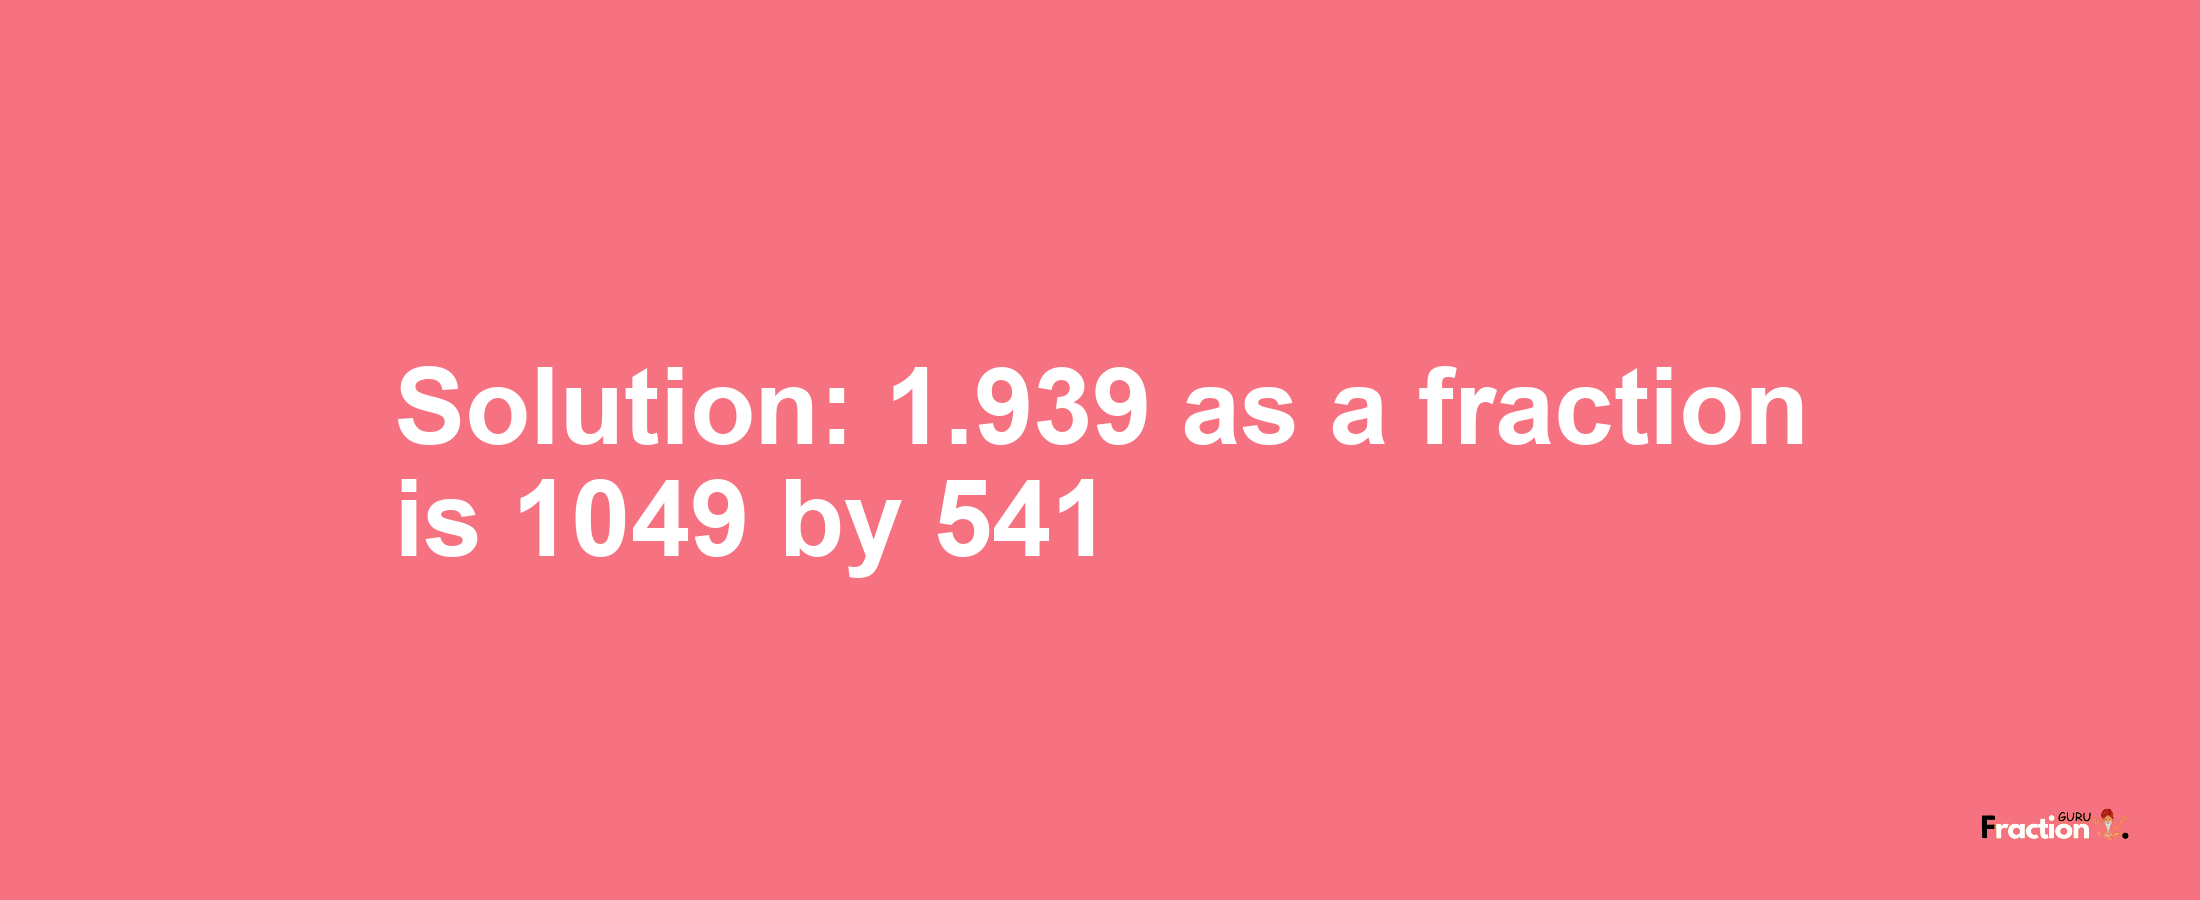 Solution:1.939 as a fraction is 1049/541